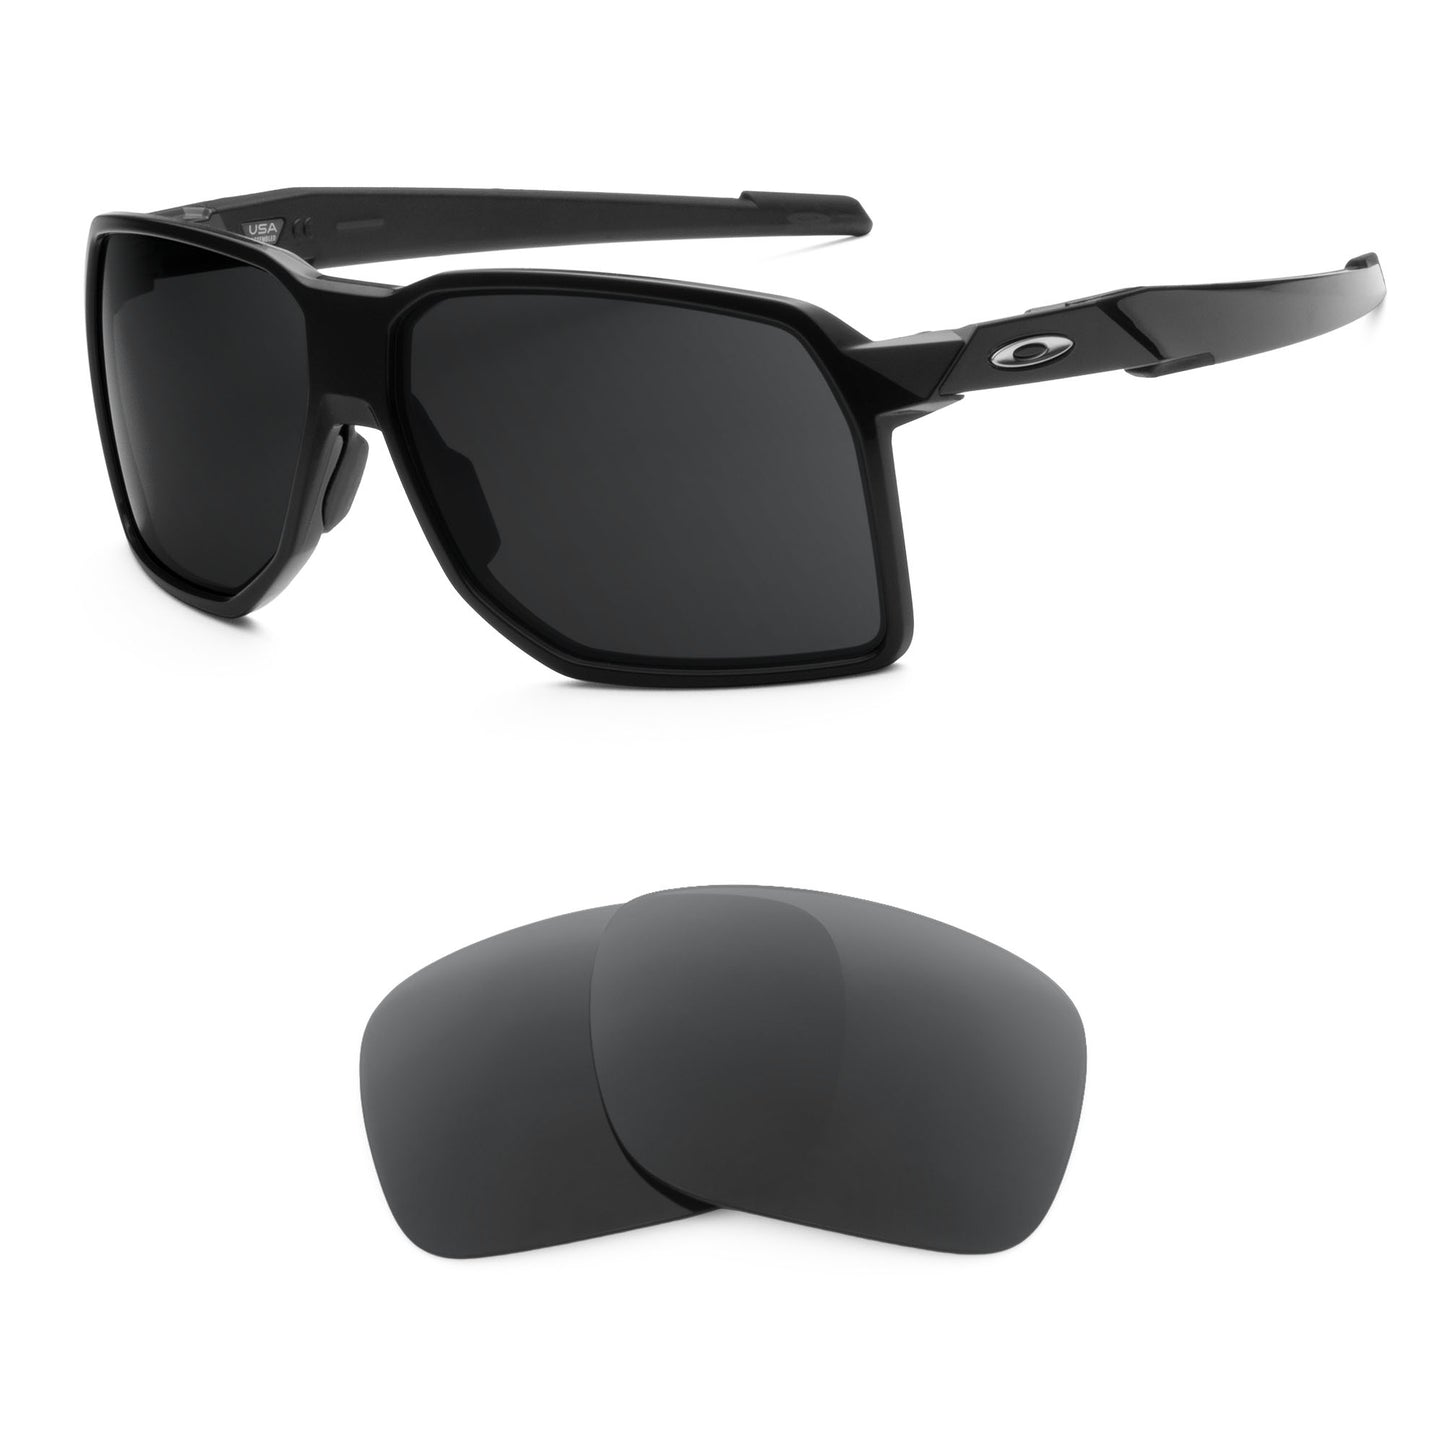 Oakley Portal sunglasses with replacement lenses